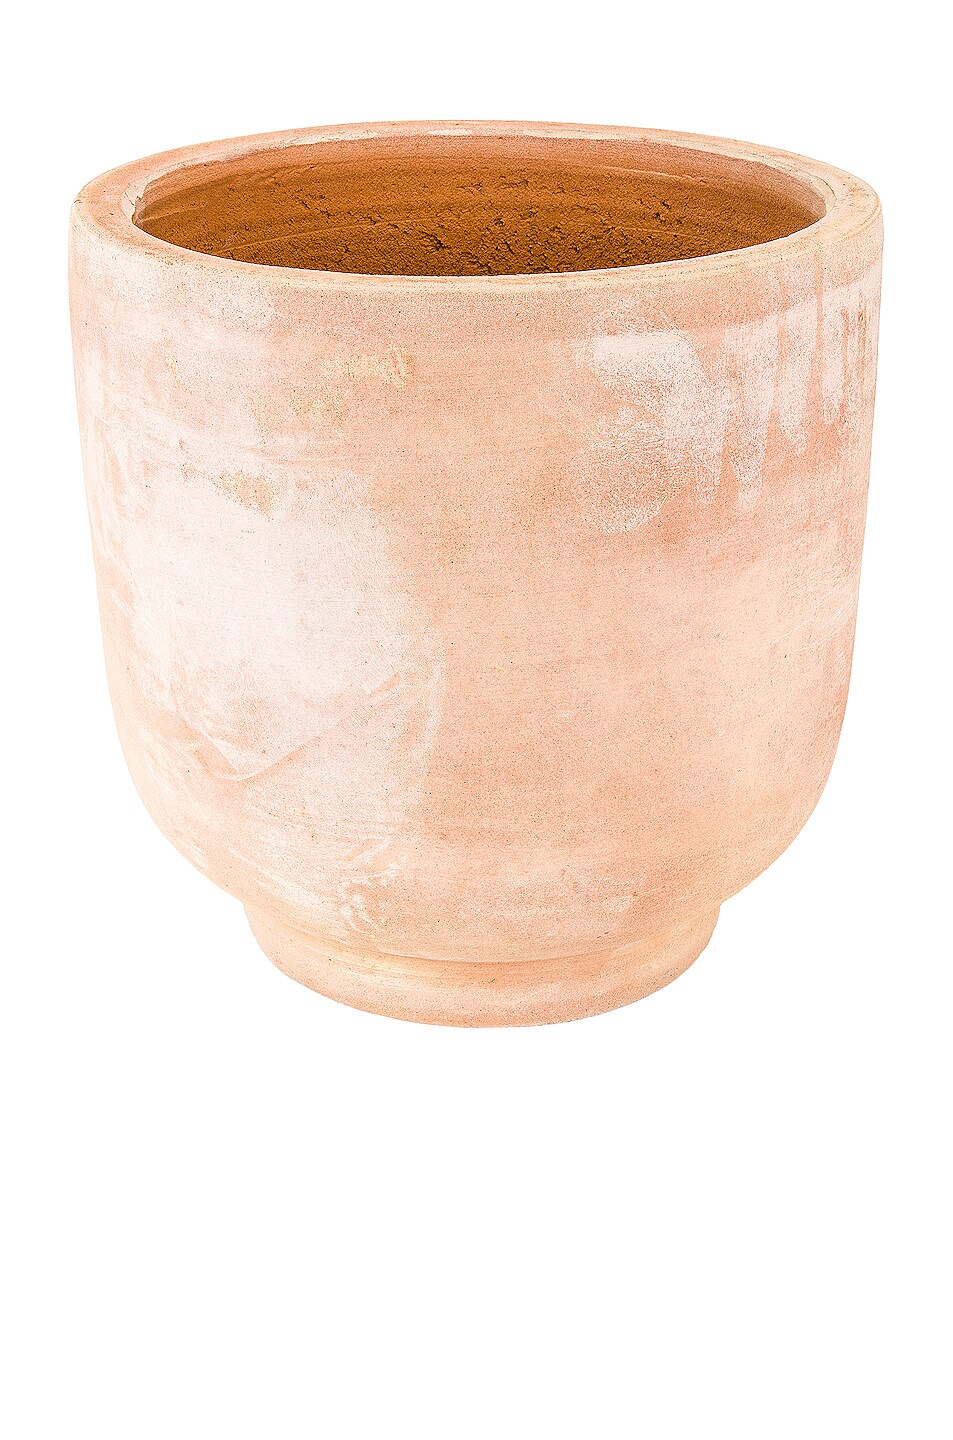 Image 1 of HAWKINS NEW YORK Footed Planter in Terracotta